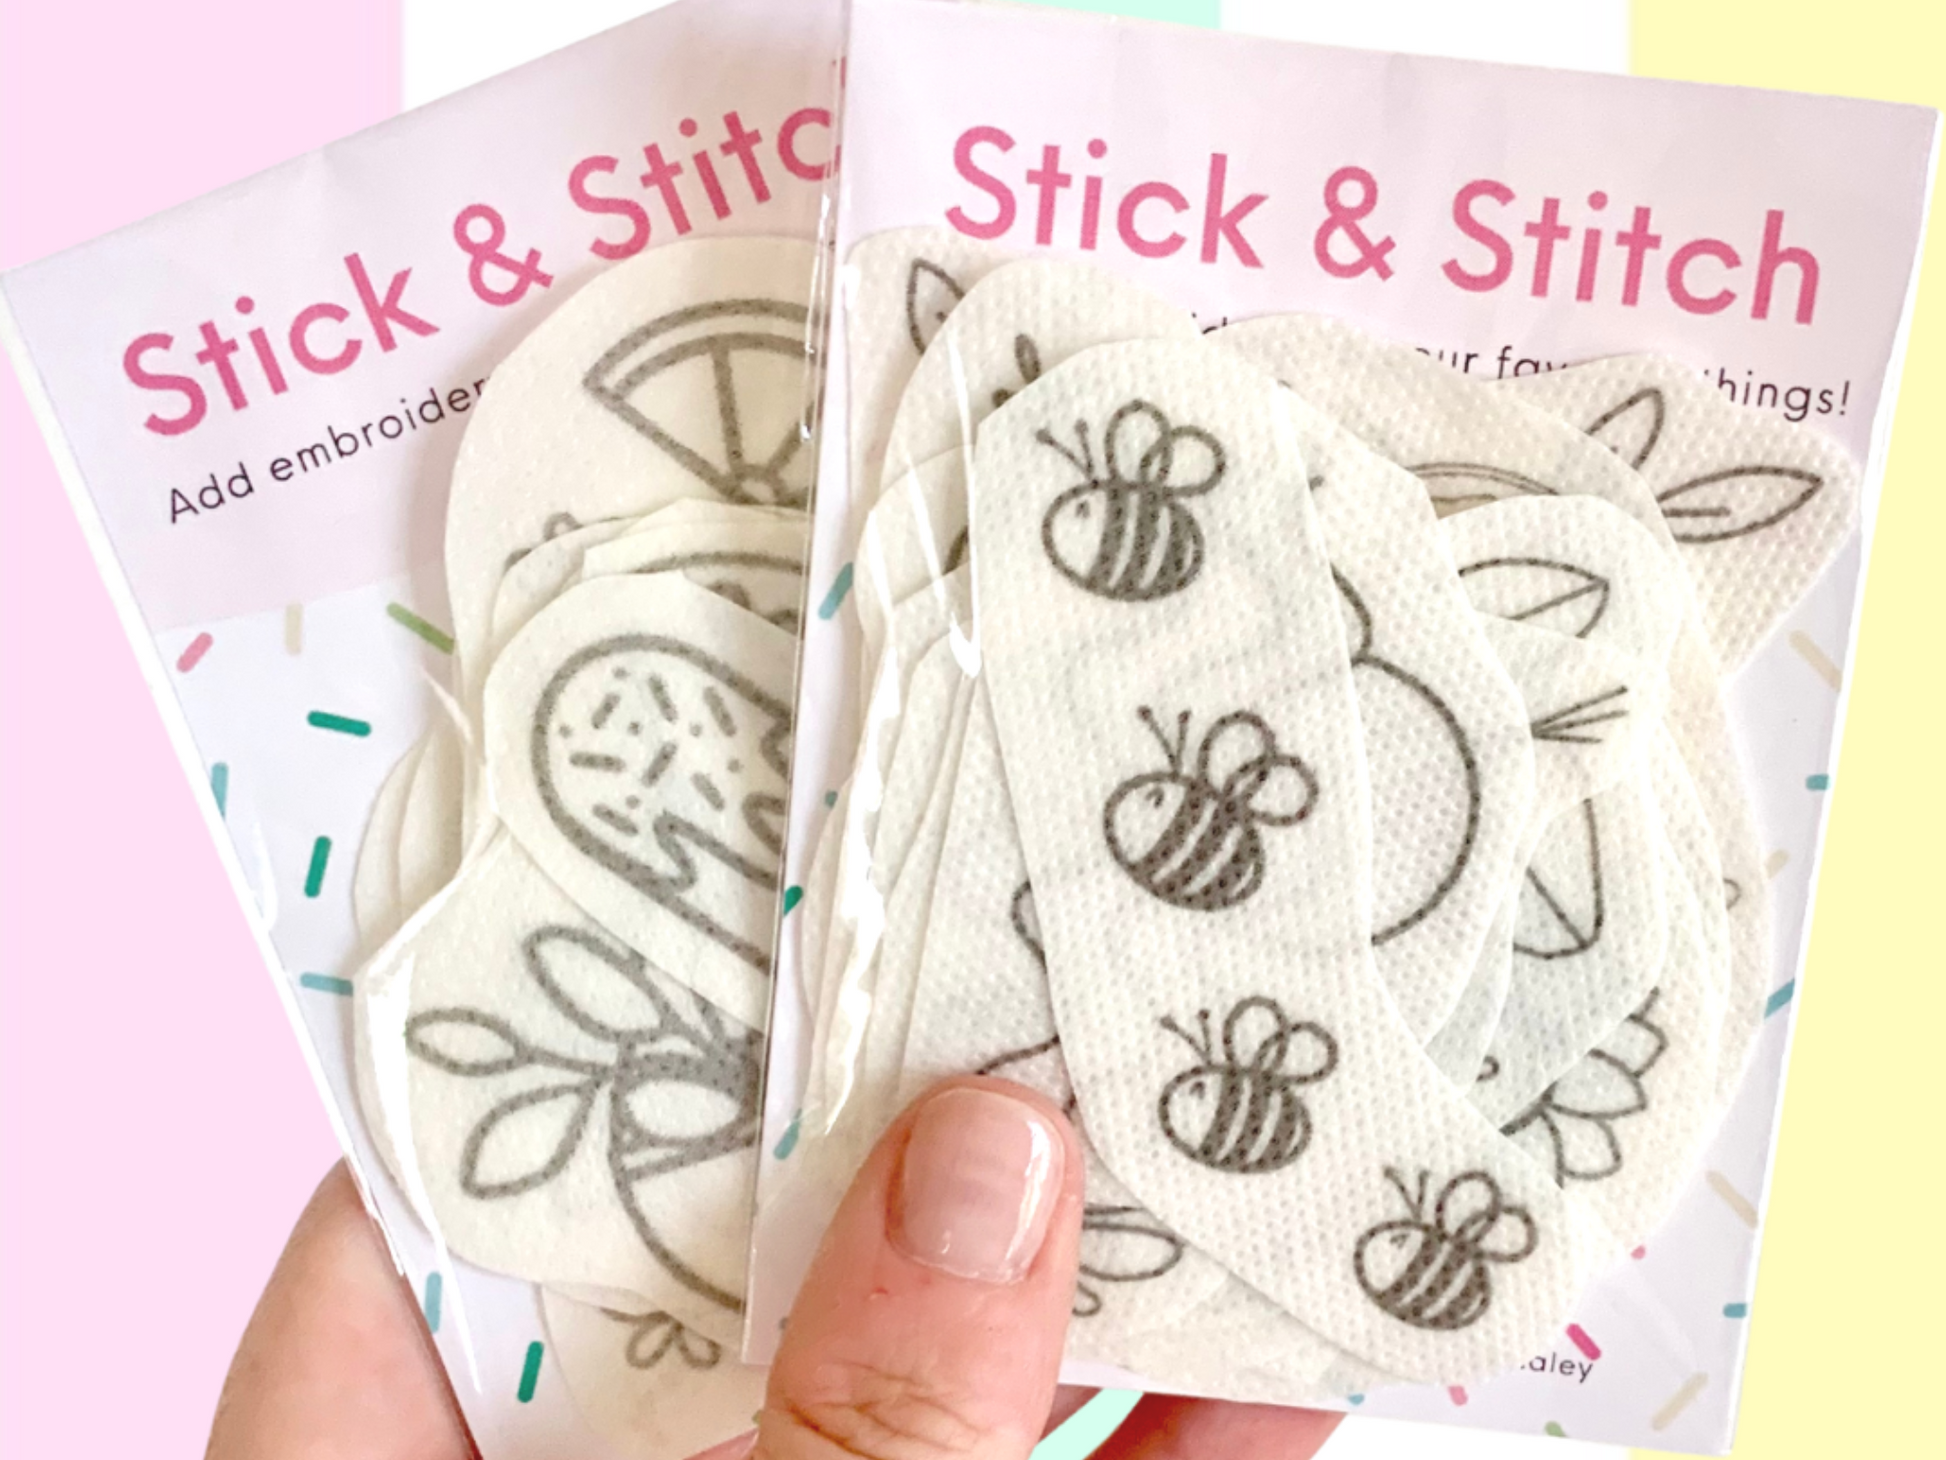 How to use stick on embroidery transfers 